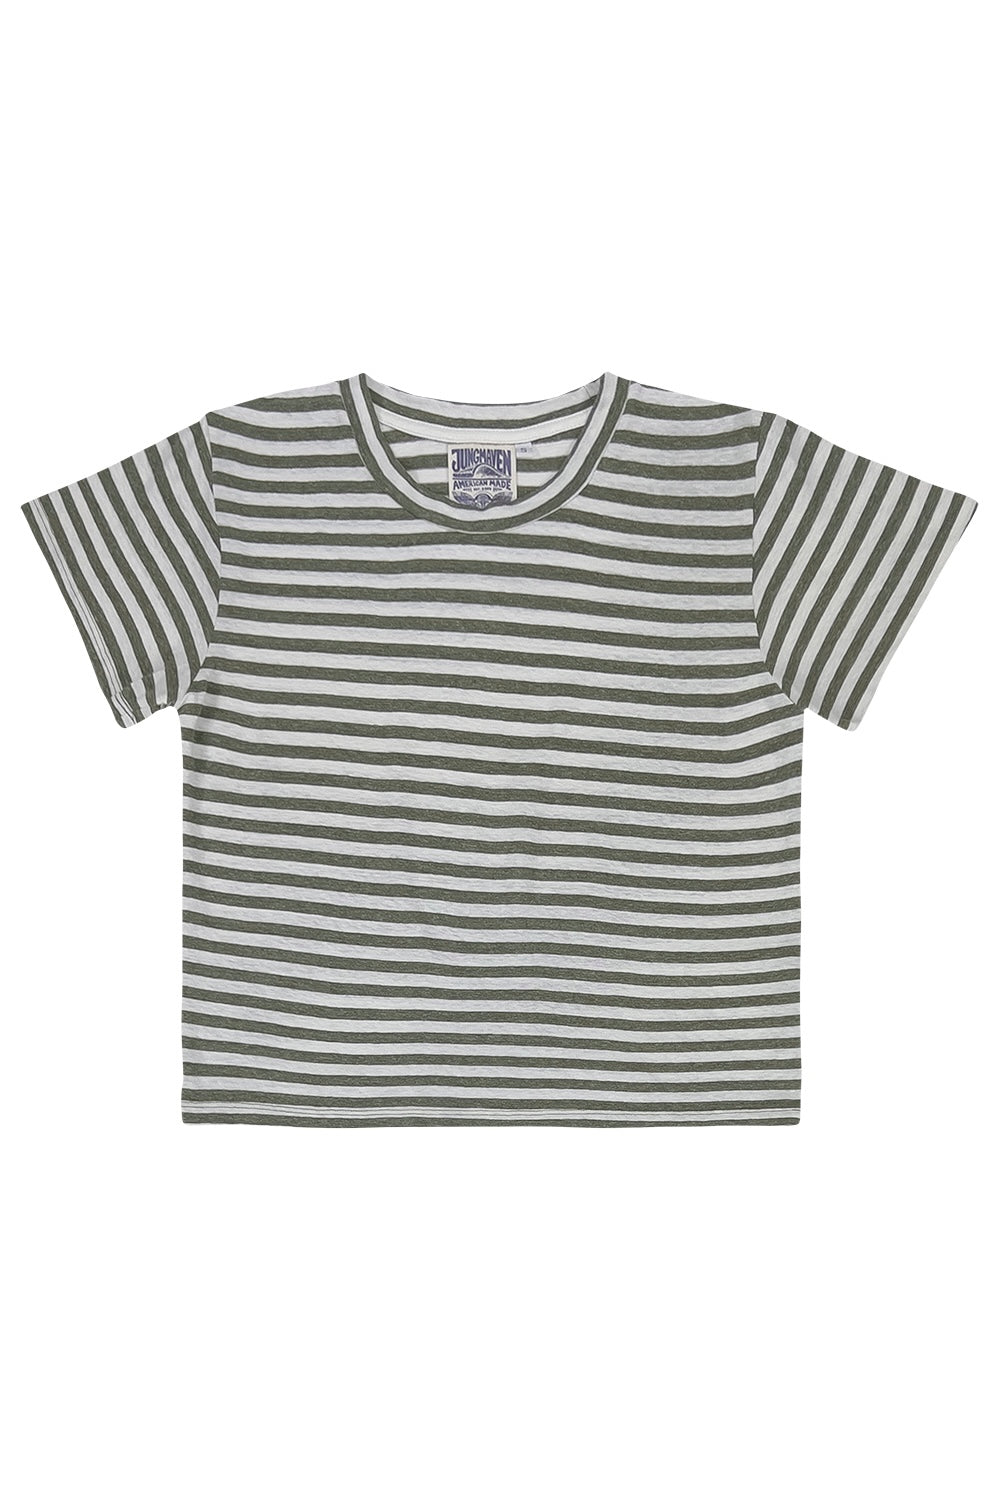 Stripe Cropped Lorel Tee  | Jungmaven Hemp Clothing & Accessories / Color: Olive/White Stripe